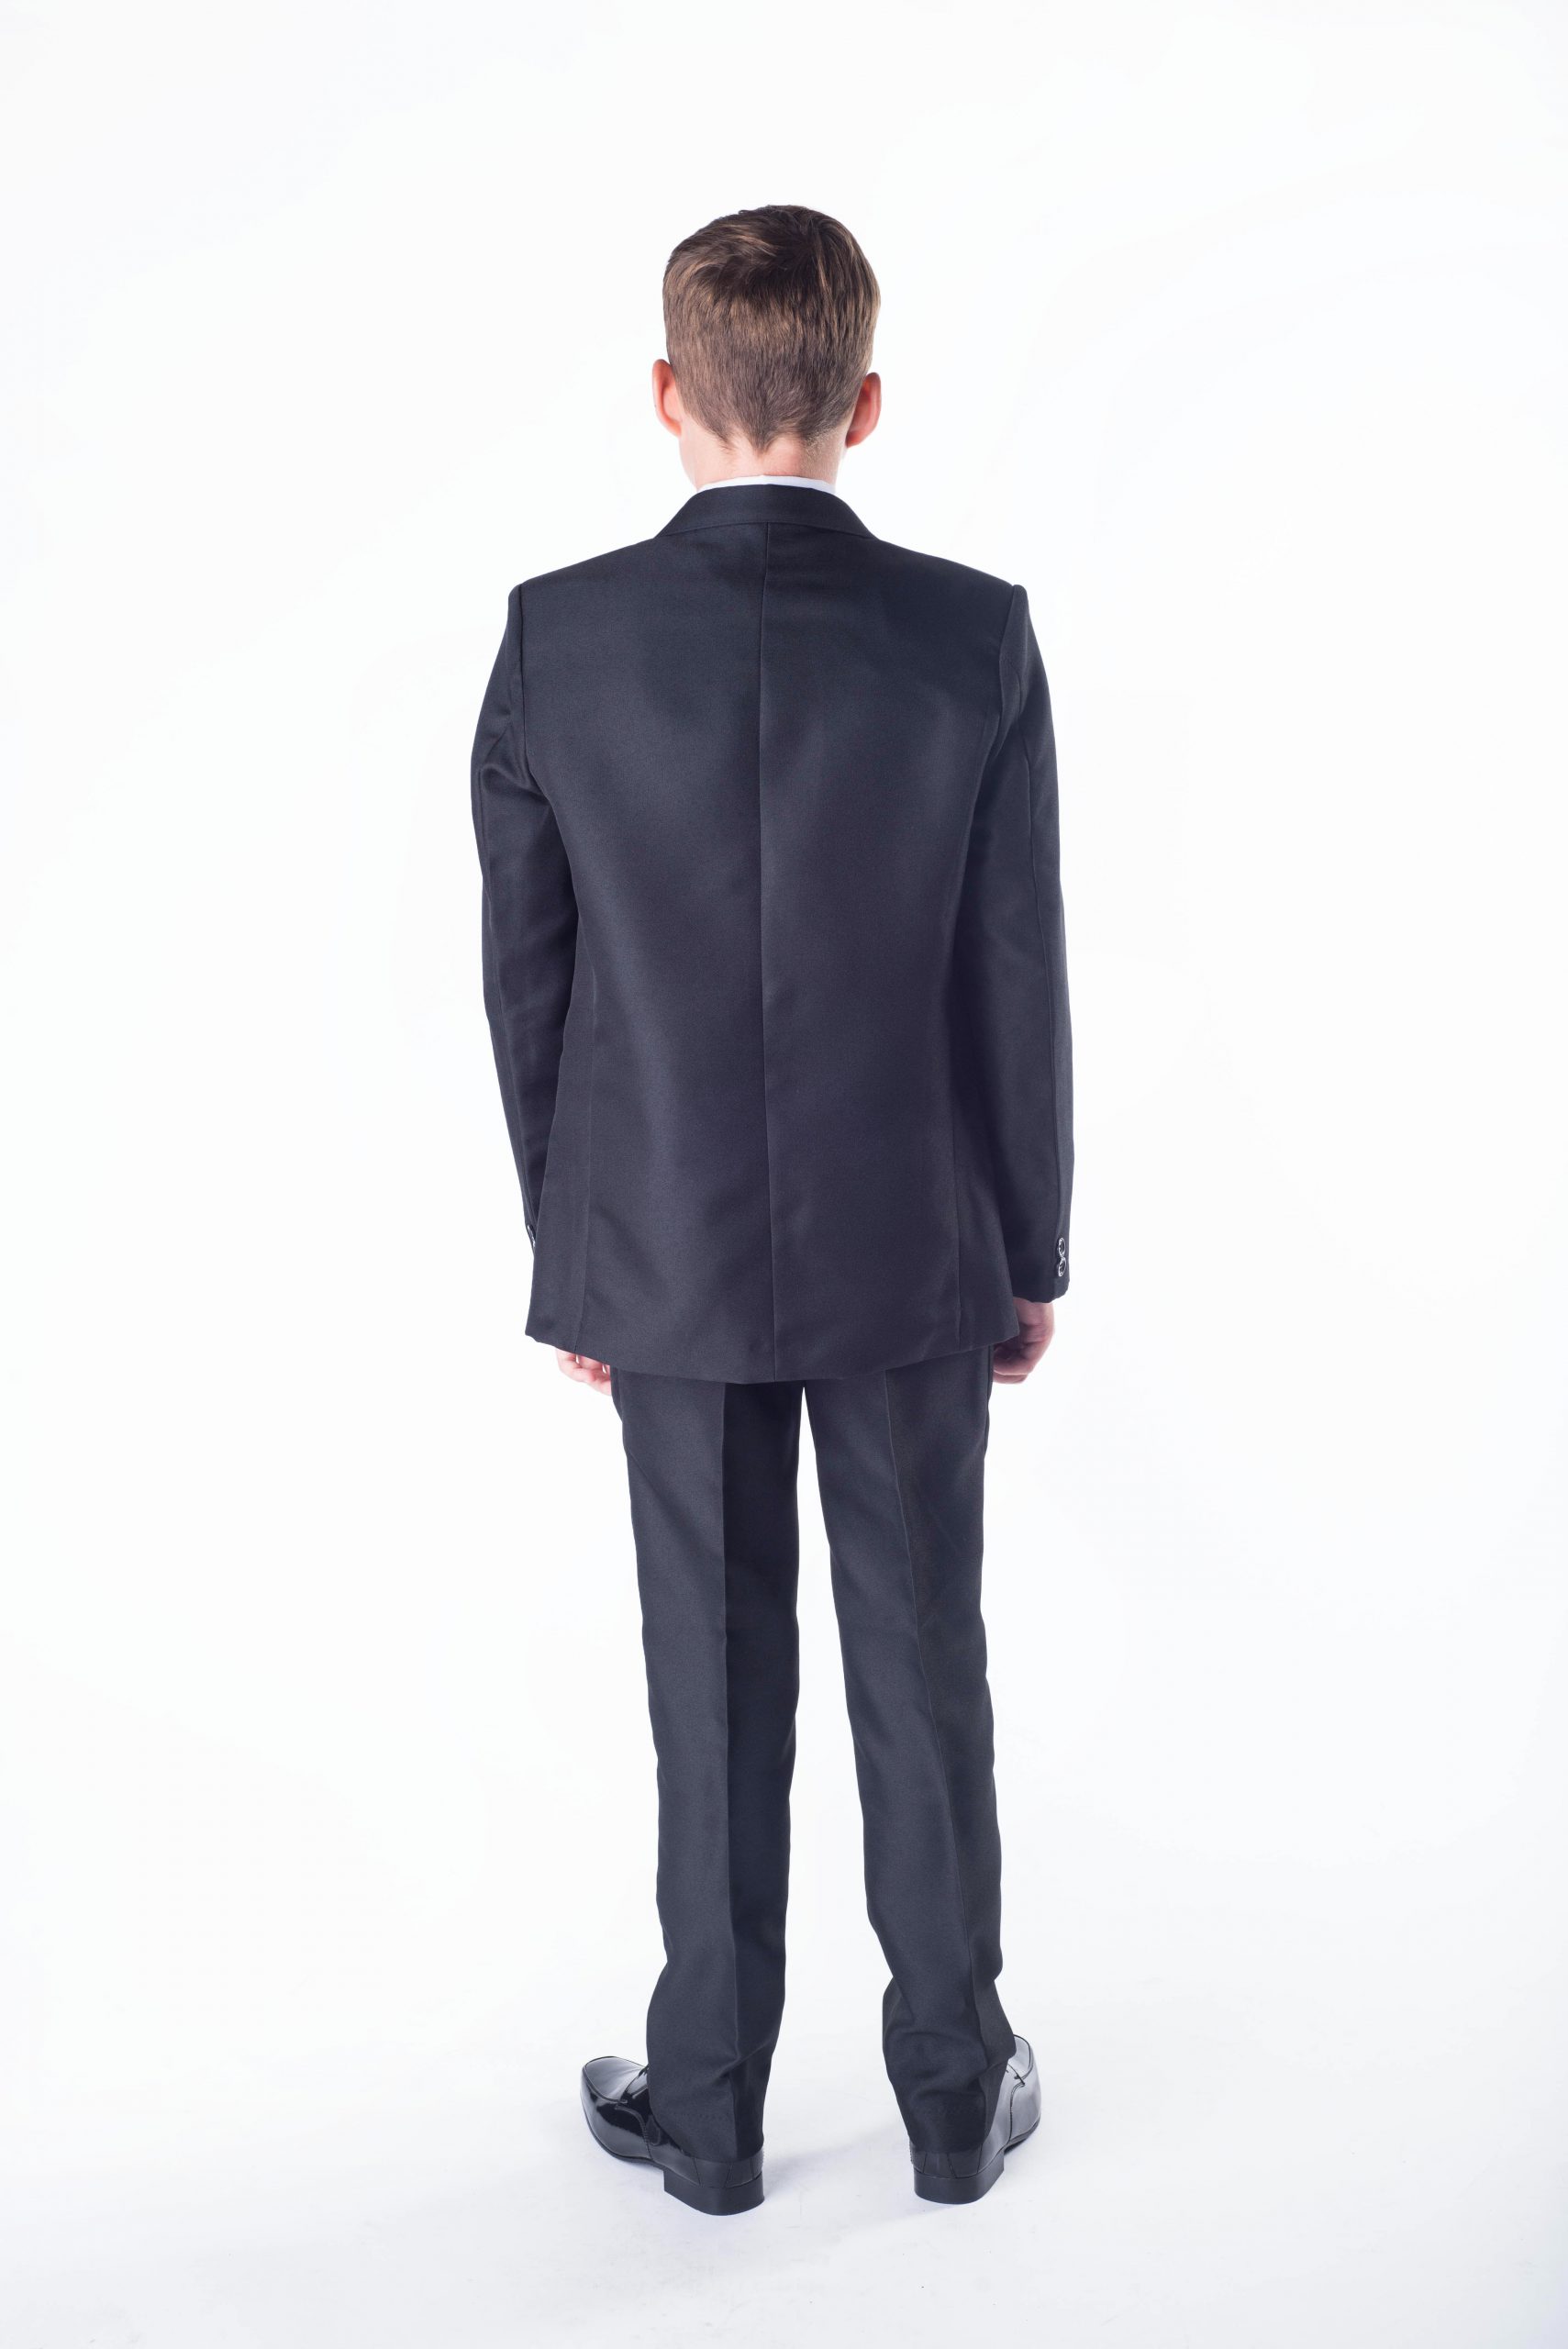 Boys Suits - Buy Suits for Boys Online in India | Myntra